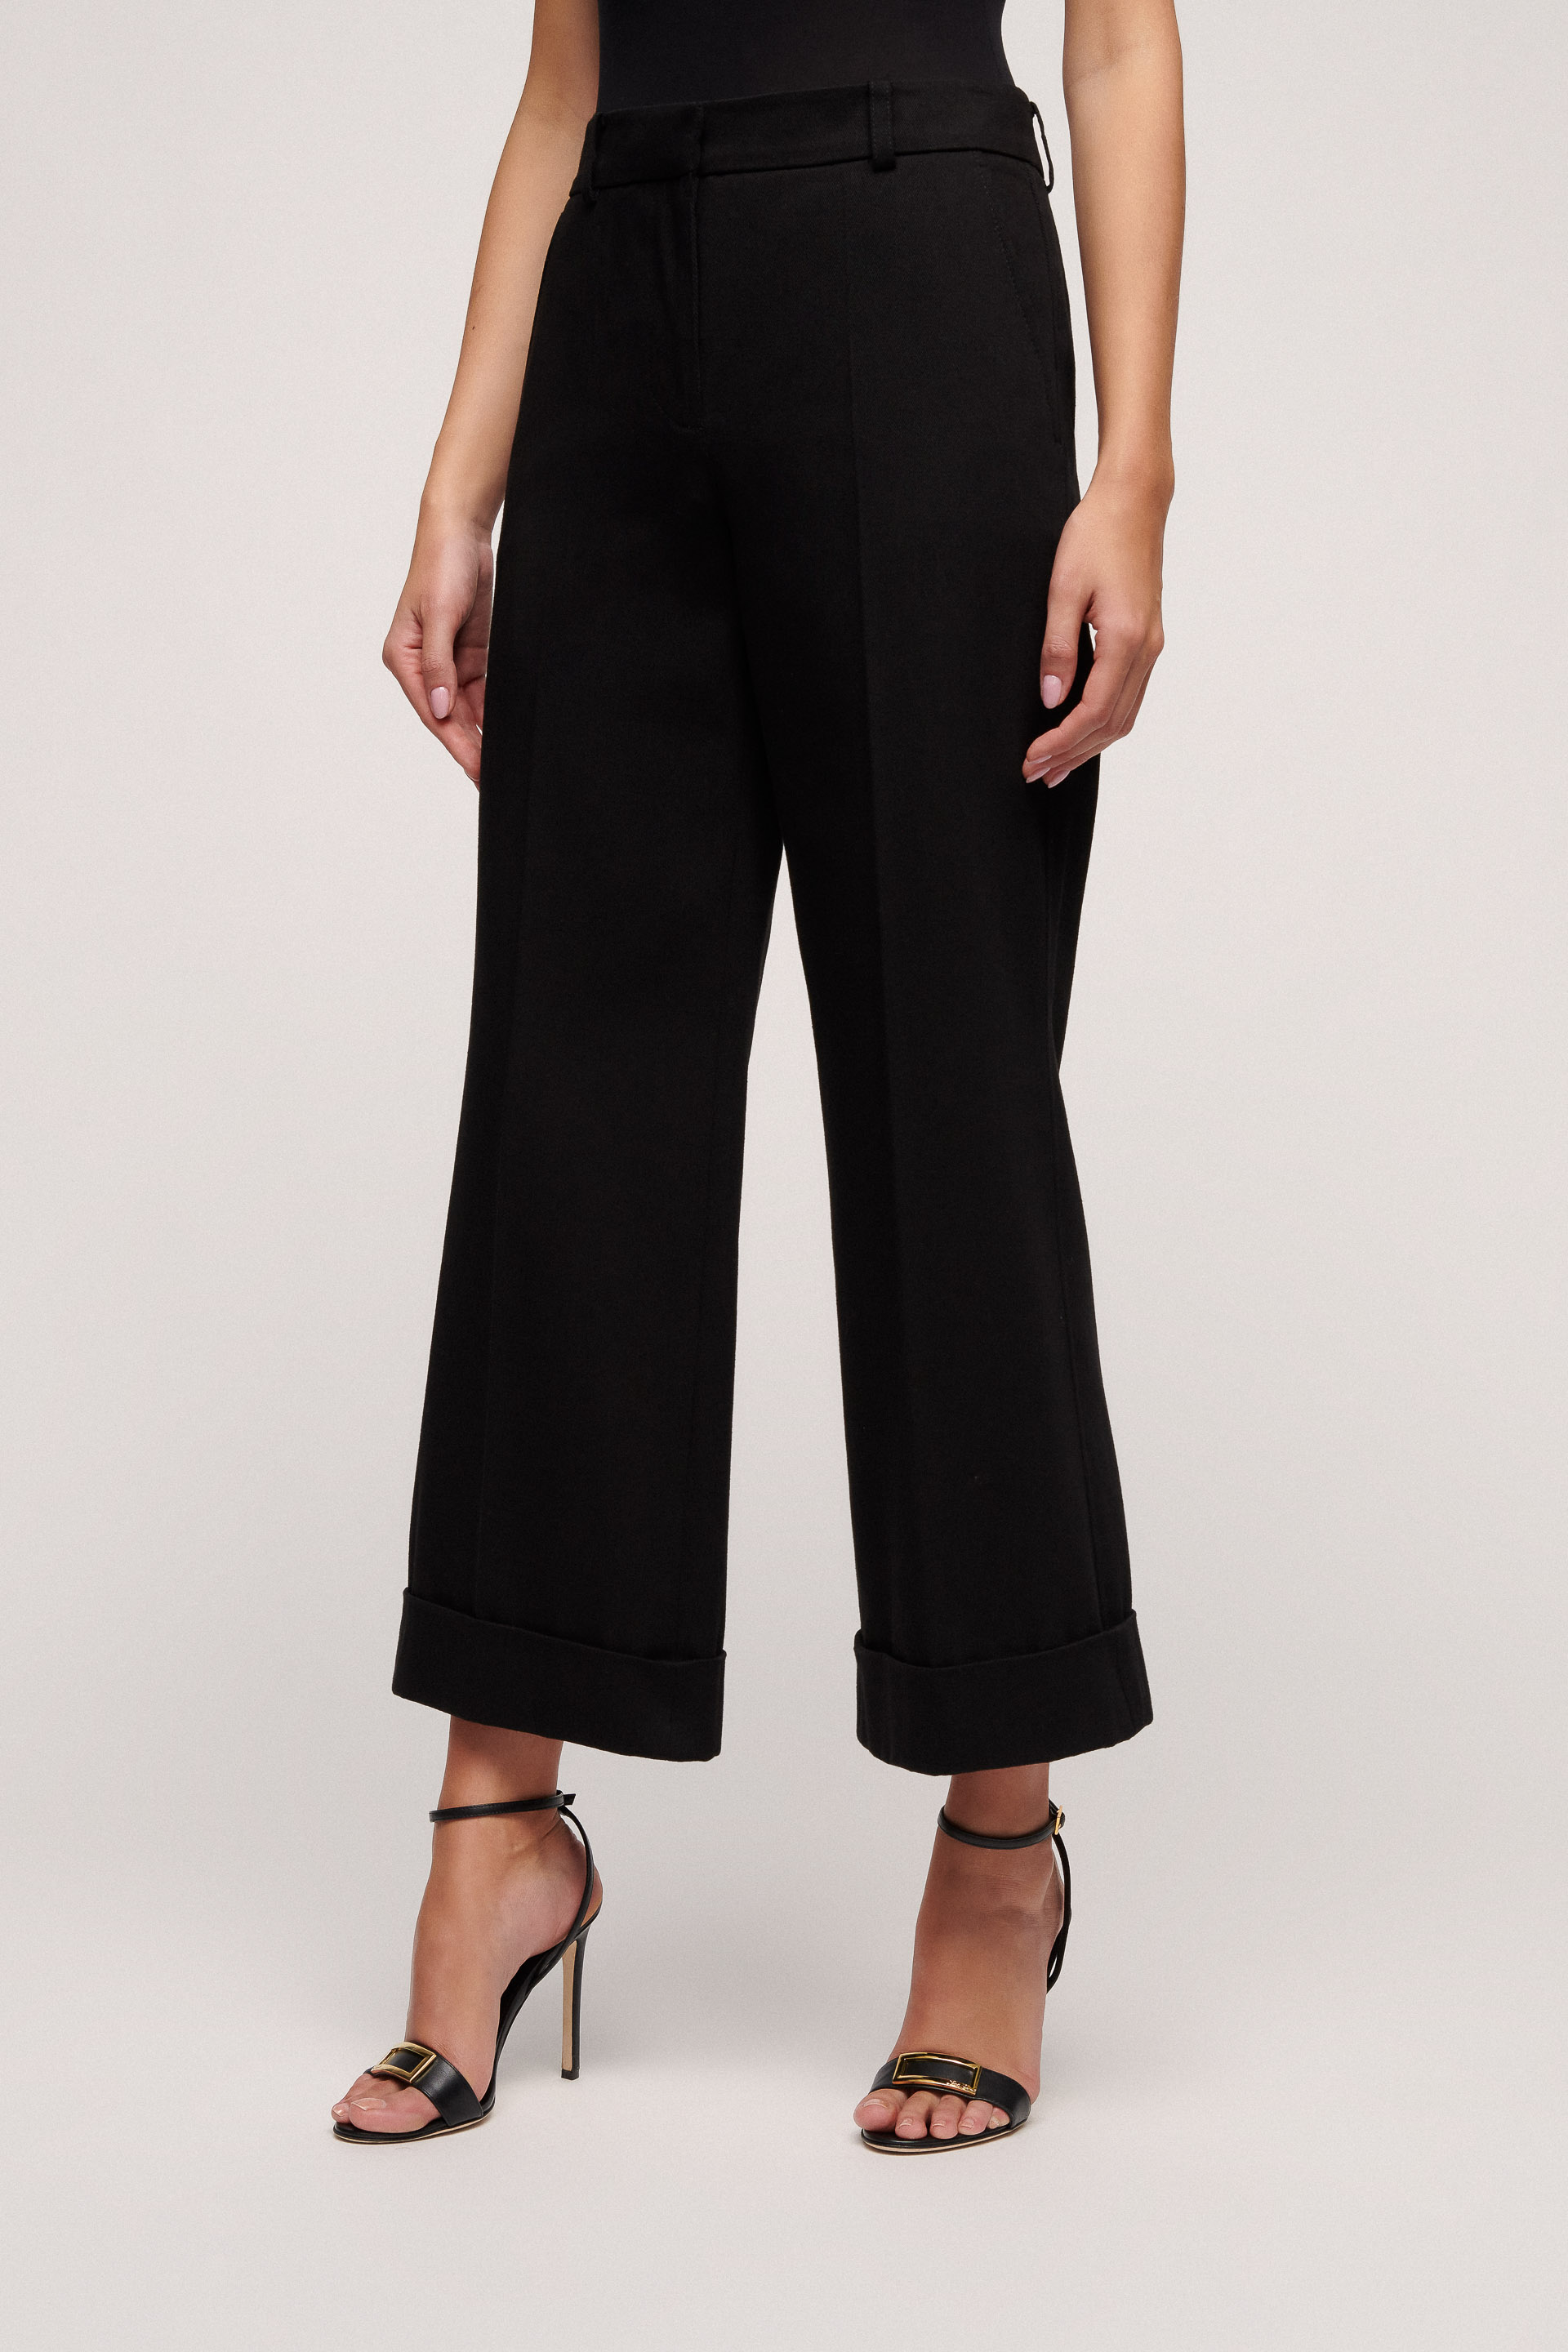 Extra HighWaisted Stevie Crop Kick Flare Pants for Women  Old Navy